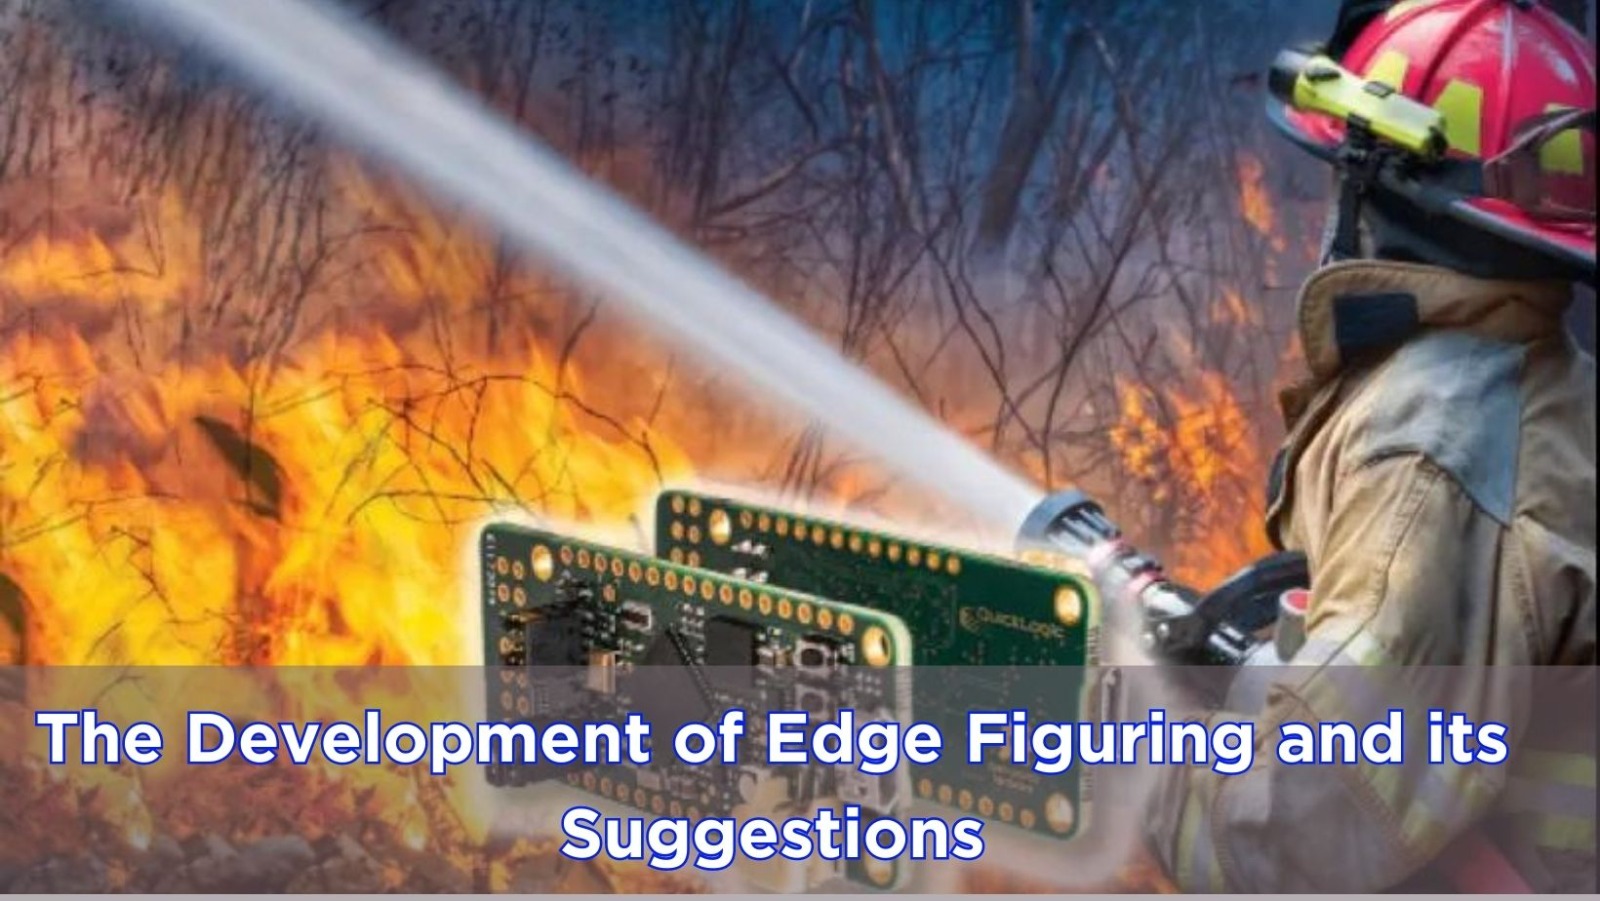 The Development of Edge Figuring and its Suggestions